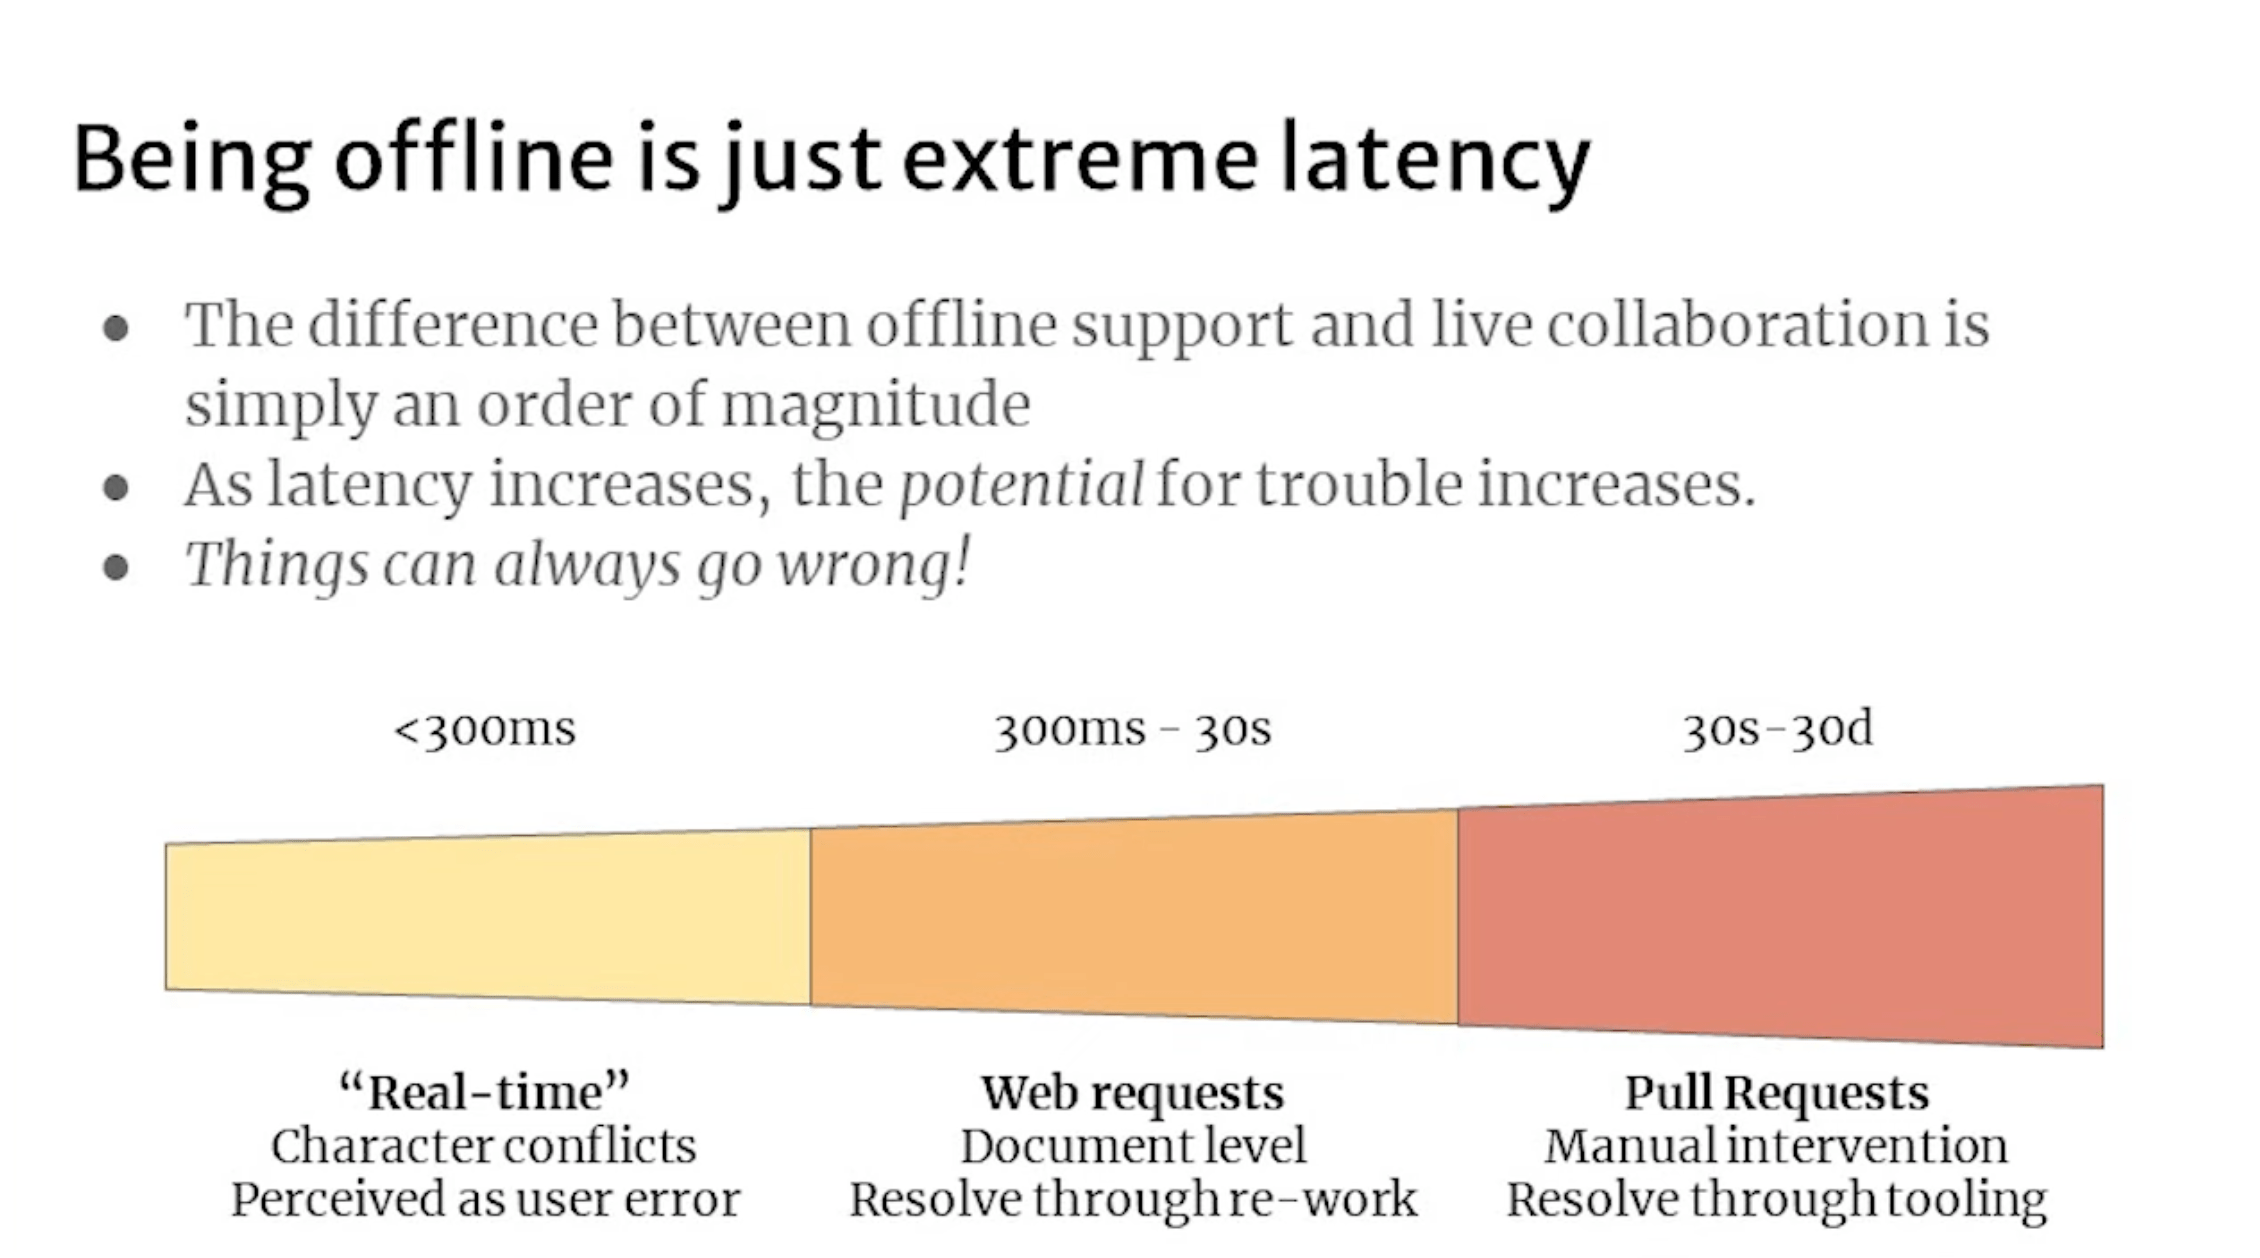 Screenshot of a slide from “Local-first Software” by Peter Van Hardenberg showing a spectrum of latency speeds, with “offline” being the most extreme form of latency.